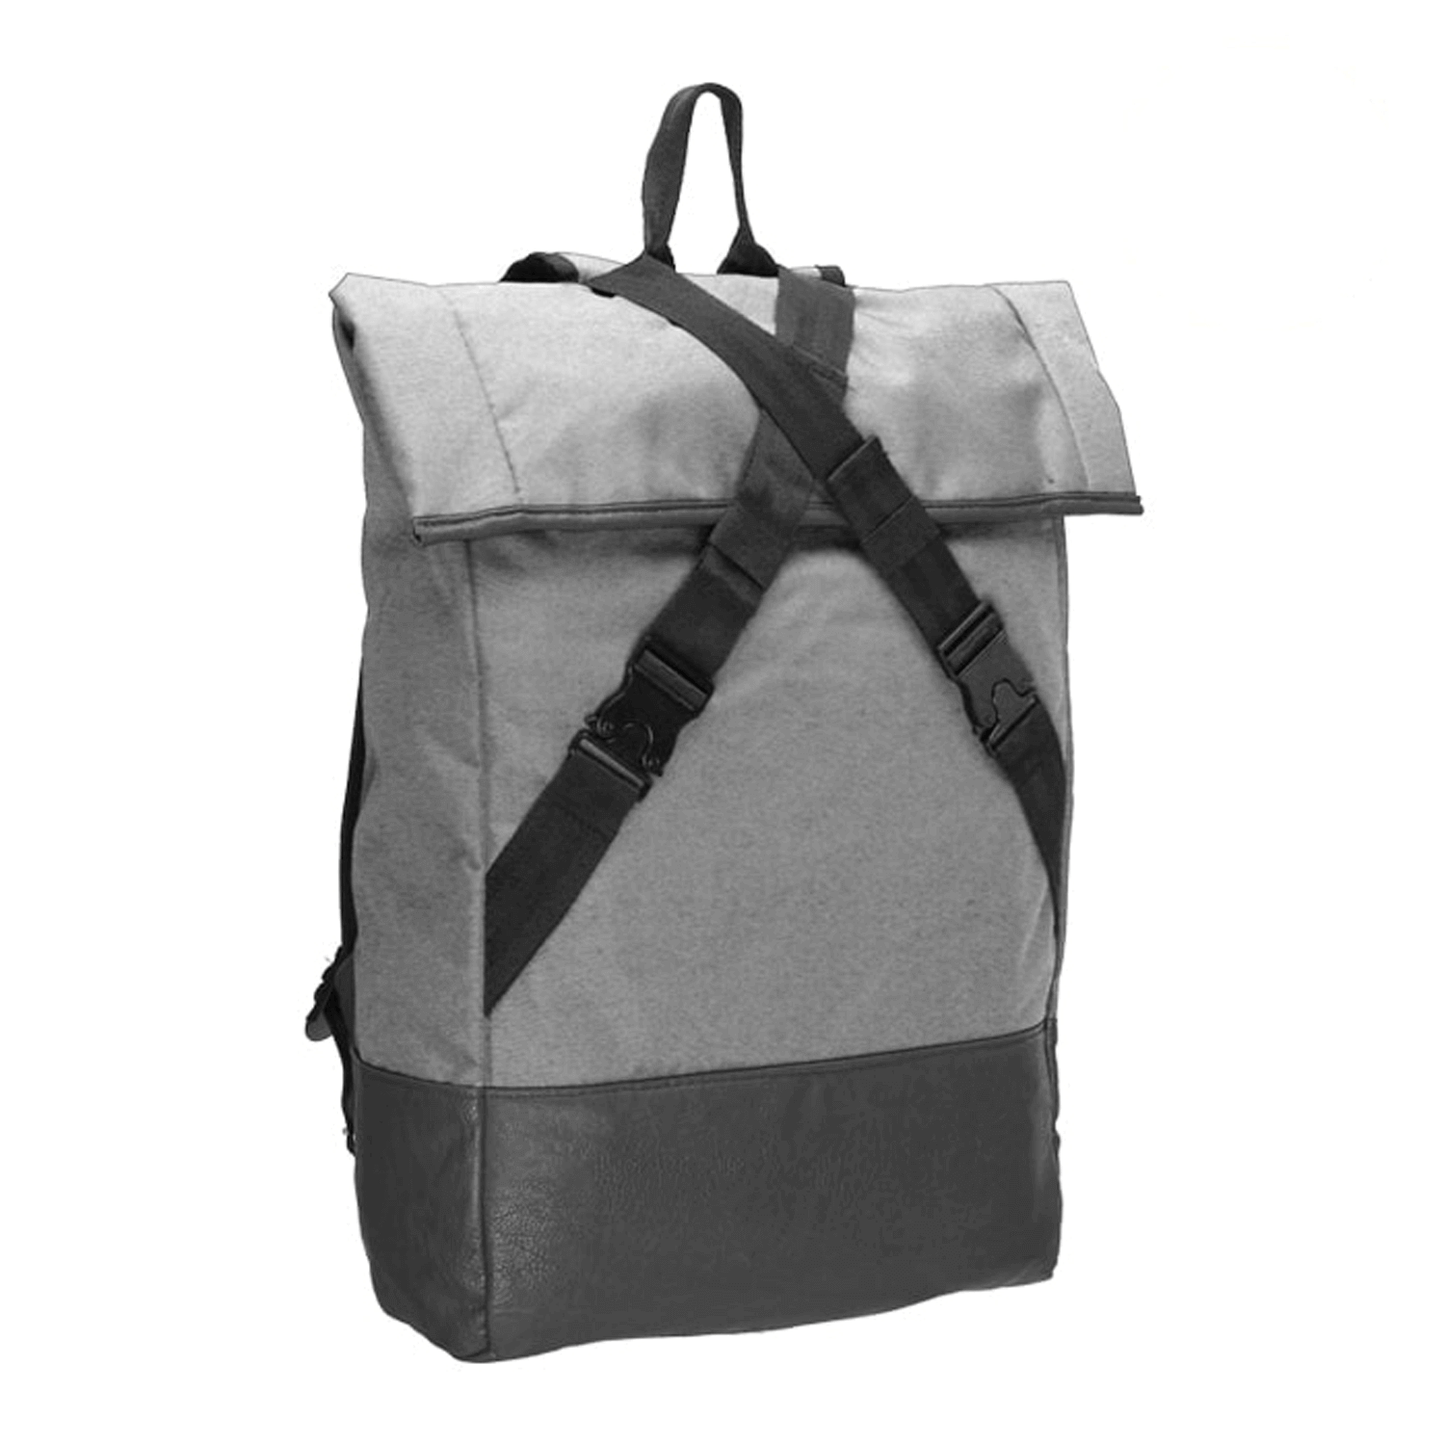 AWOL DAILY Large Gray Backpack 886171 Harvest & Extraction 853336007959